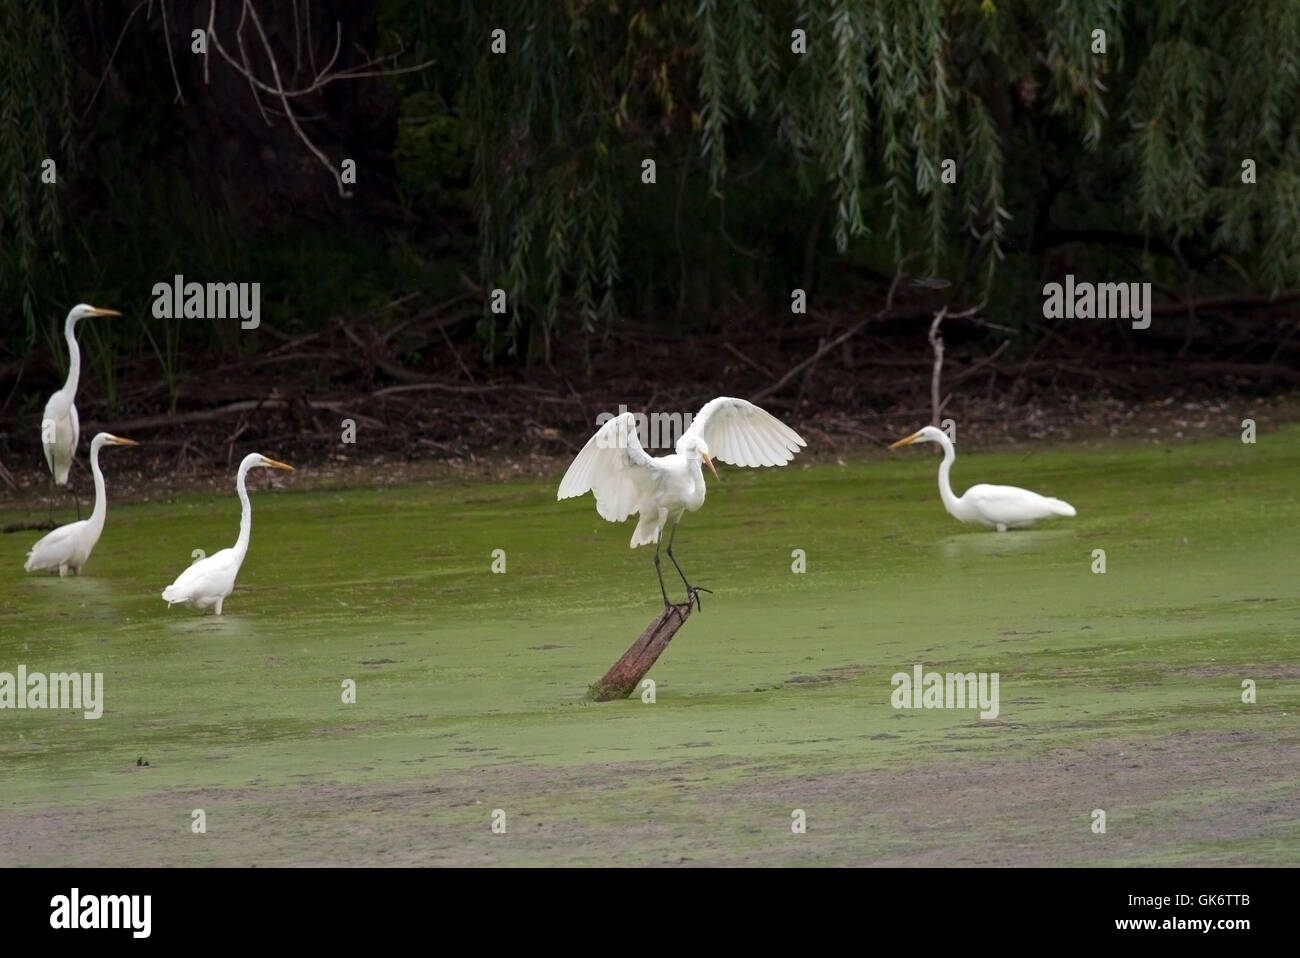 Several great white egrets gather in duckweed covered pond Stock Photo